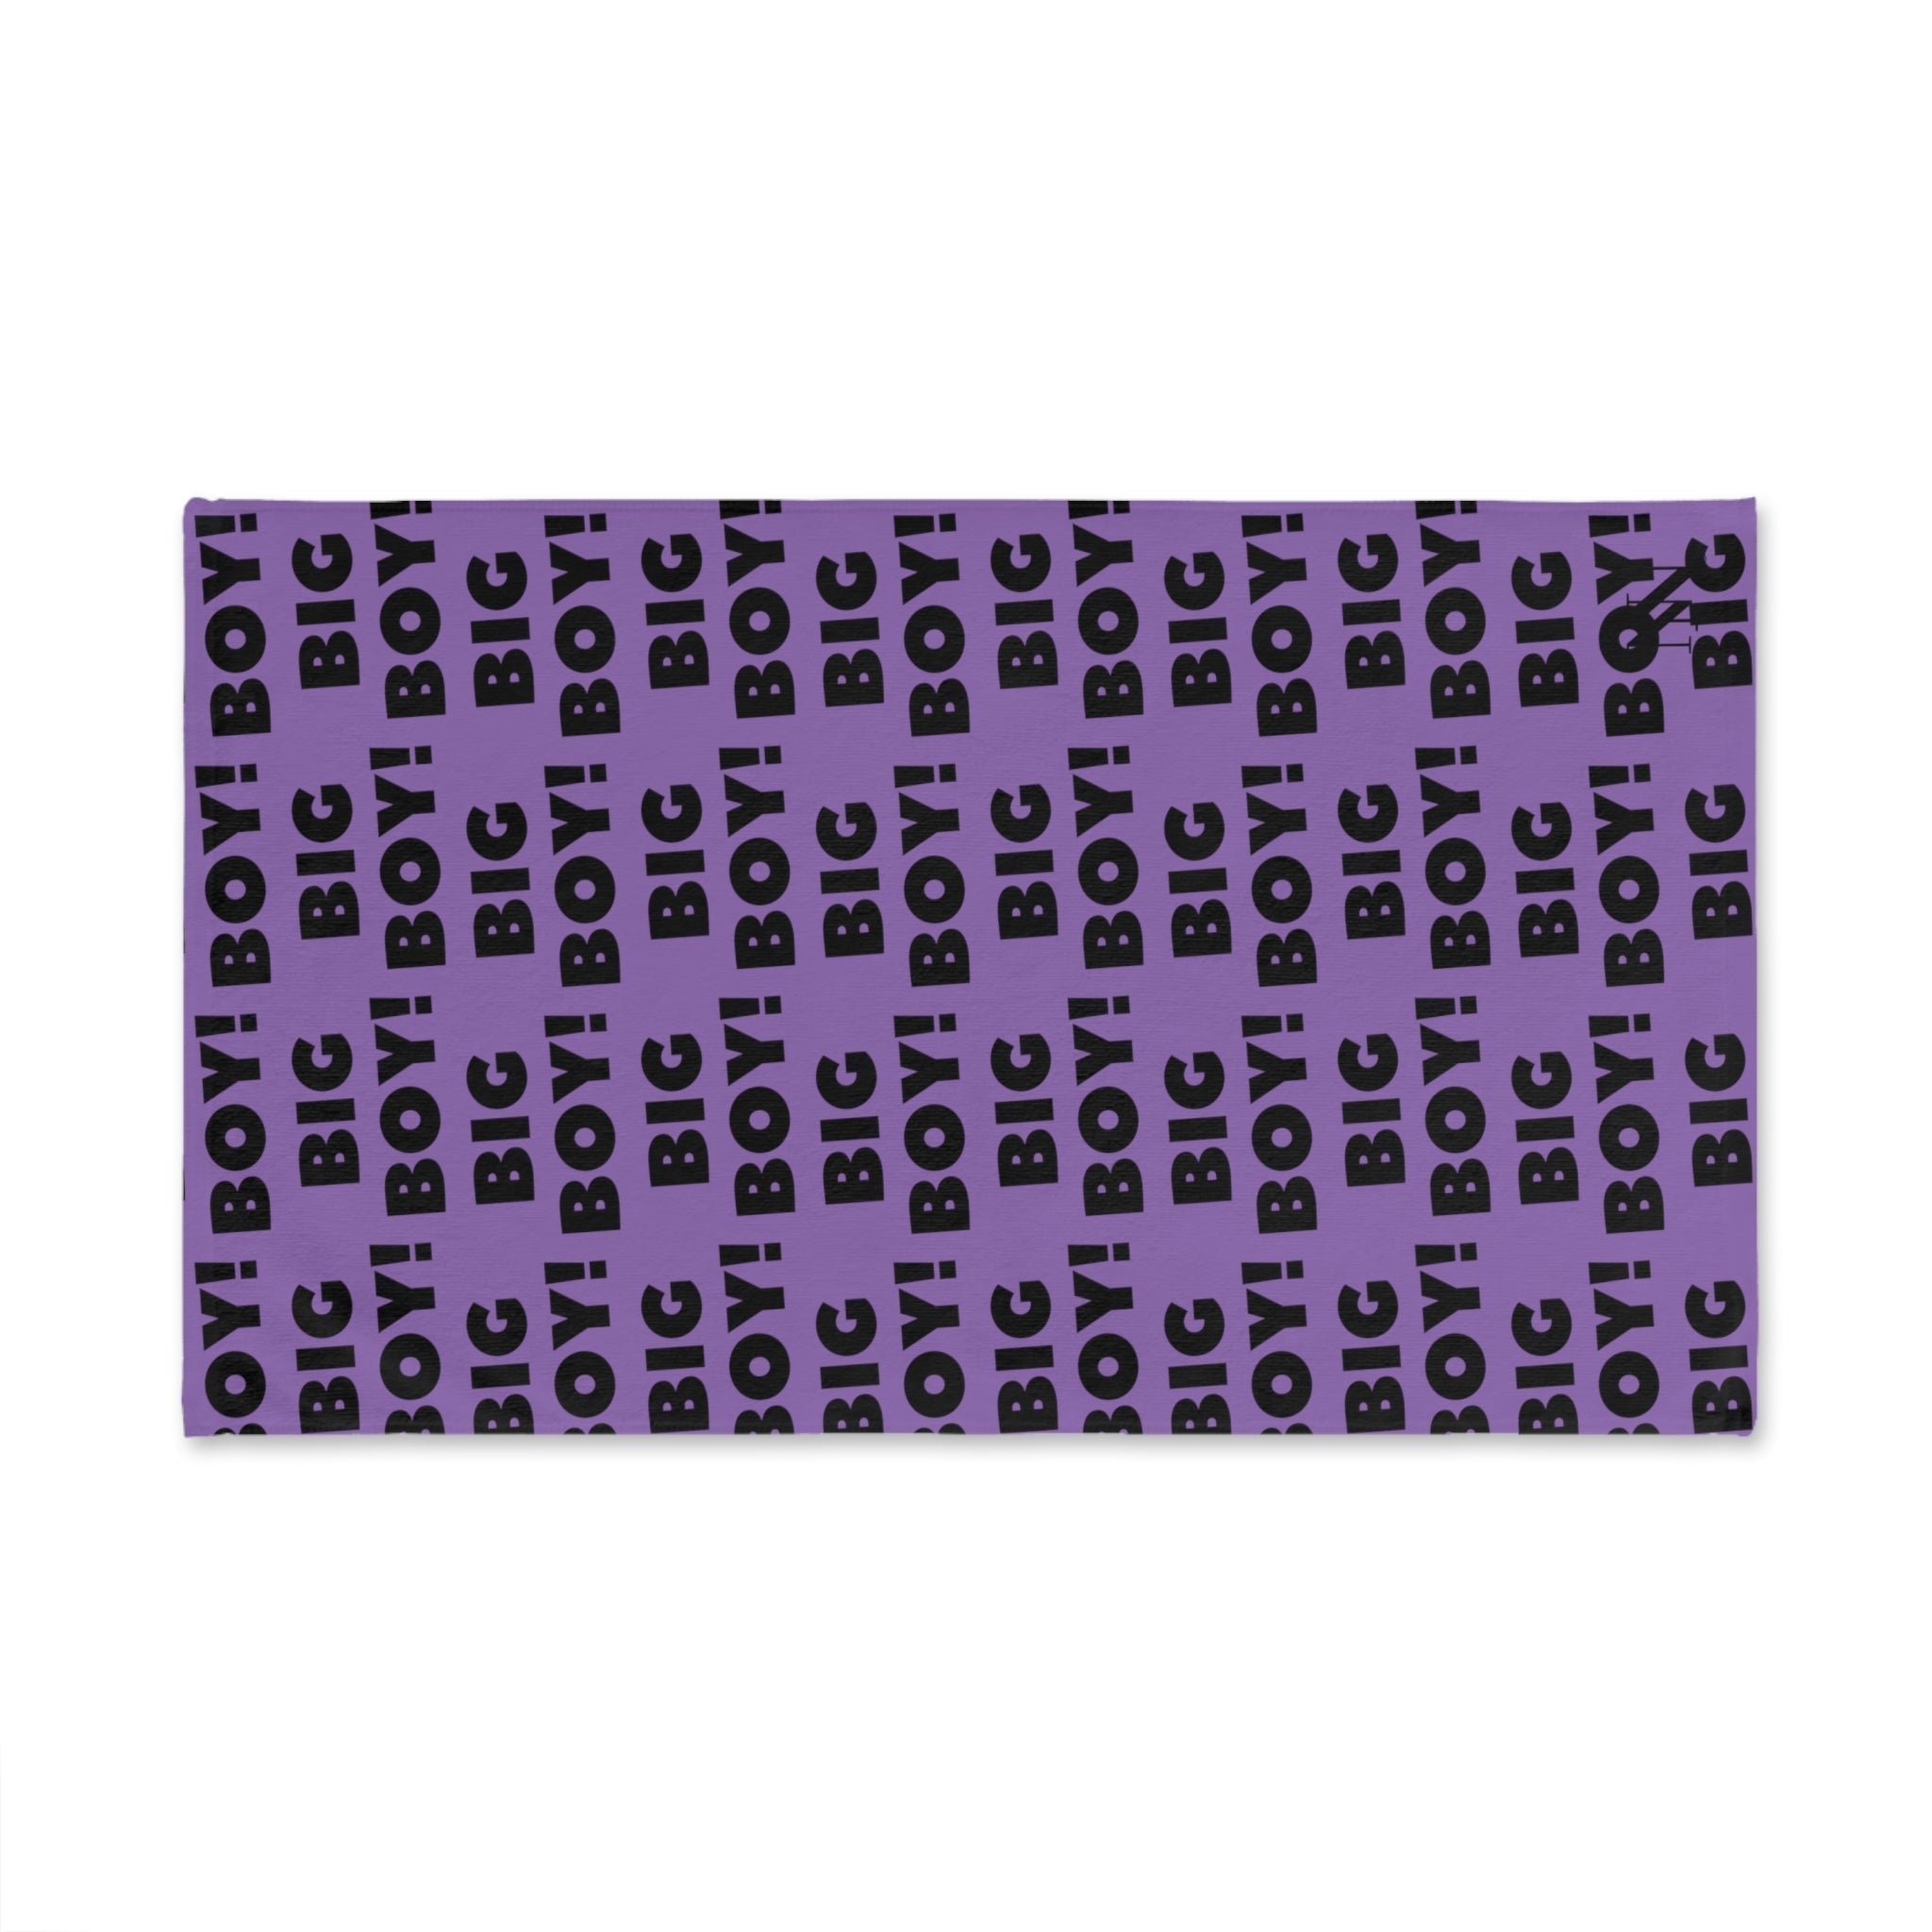 Big Boy Pattern Lavendar | Funny Gifts for Men - Gifts for Him - Birthday Gifts for Men, Him, Husband, Boyfriend, New Couple Gifts, Fathers & Valentines Day Gifts, Hand Towels Valentines NECTAR NAPKINS